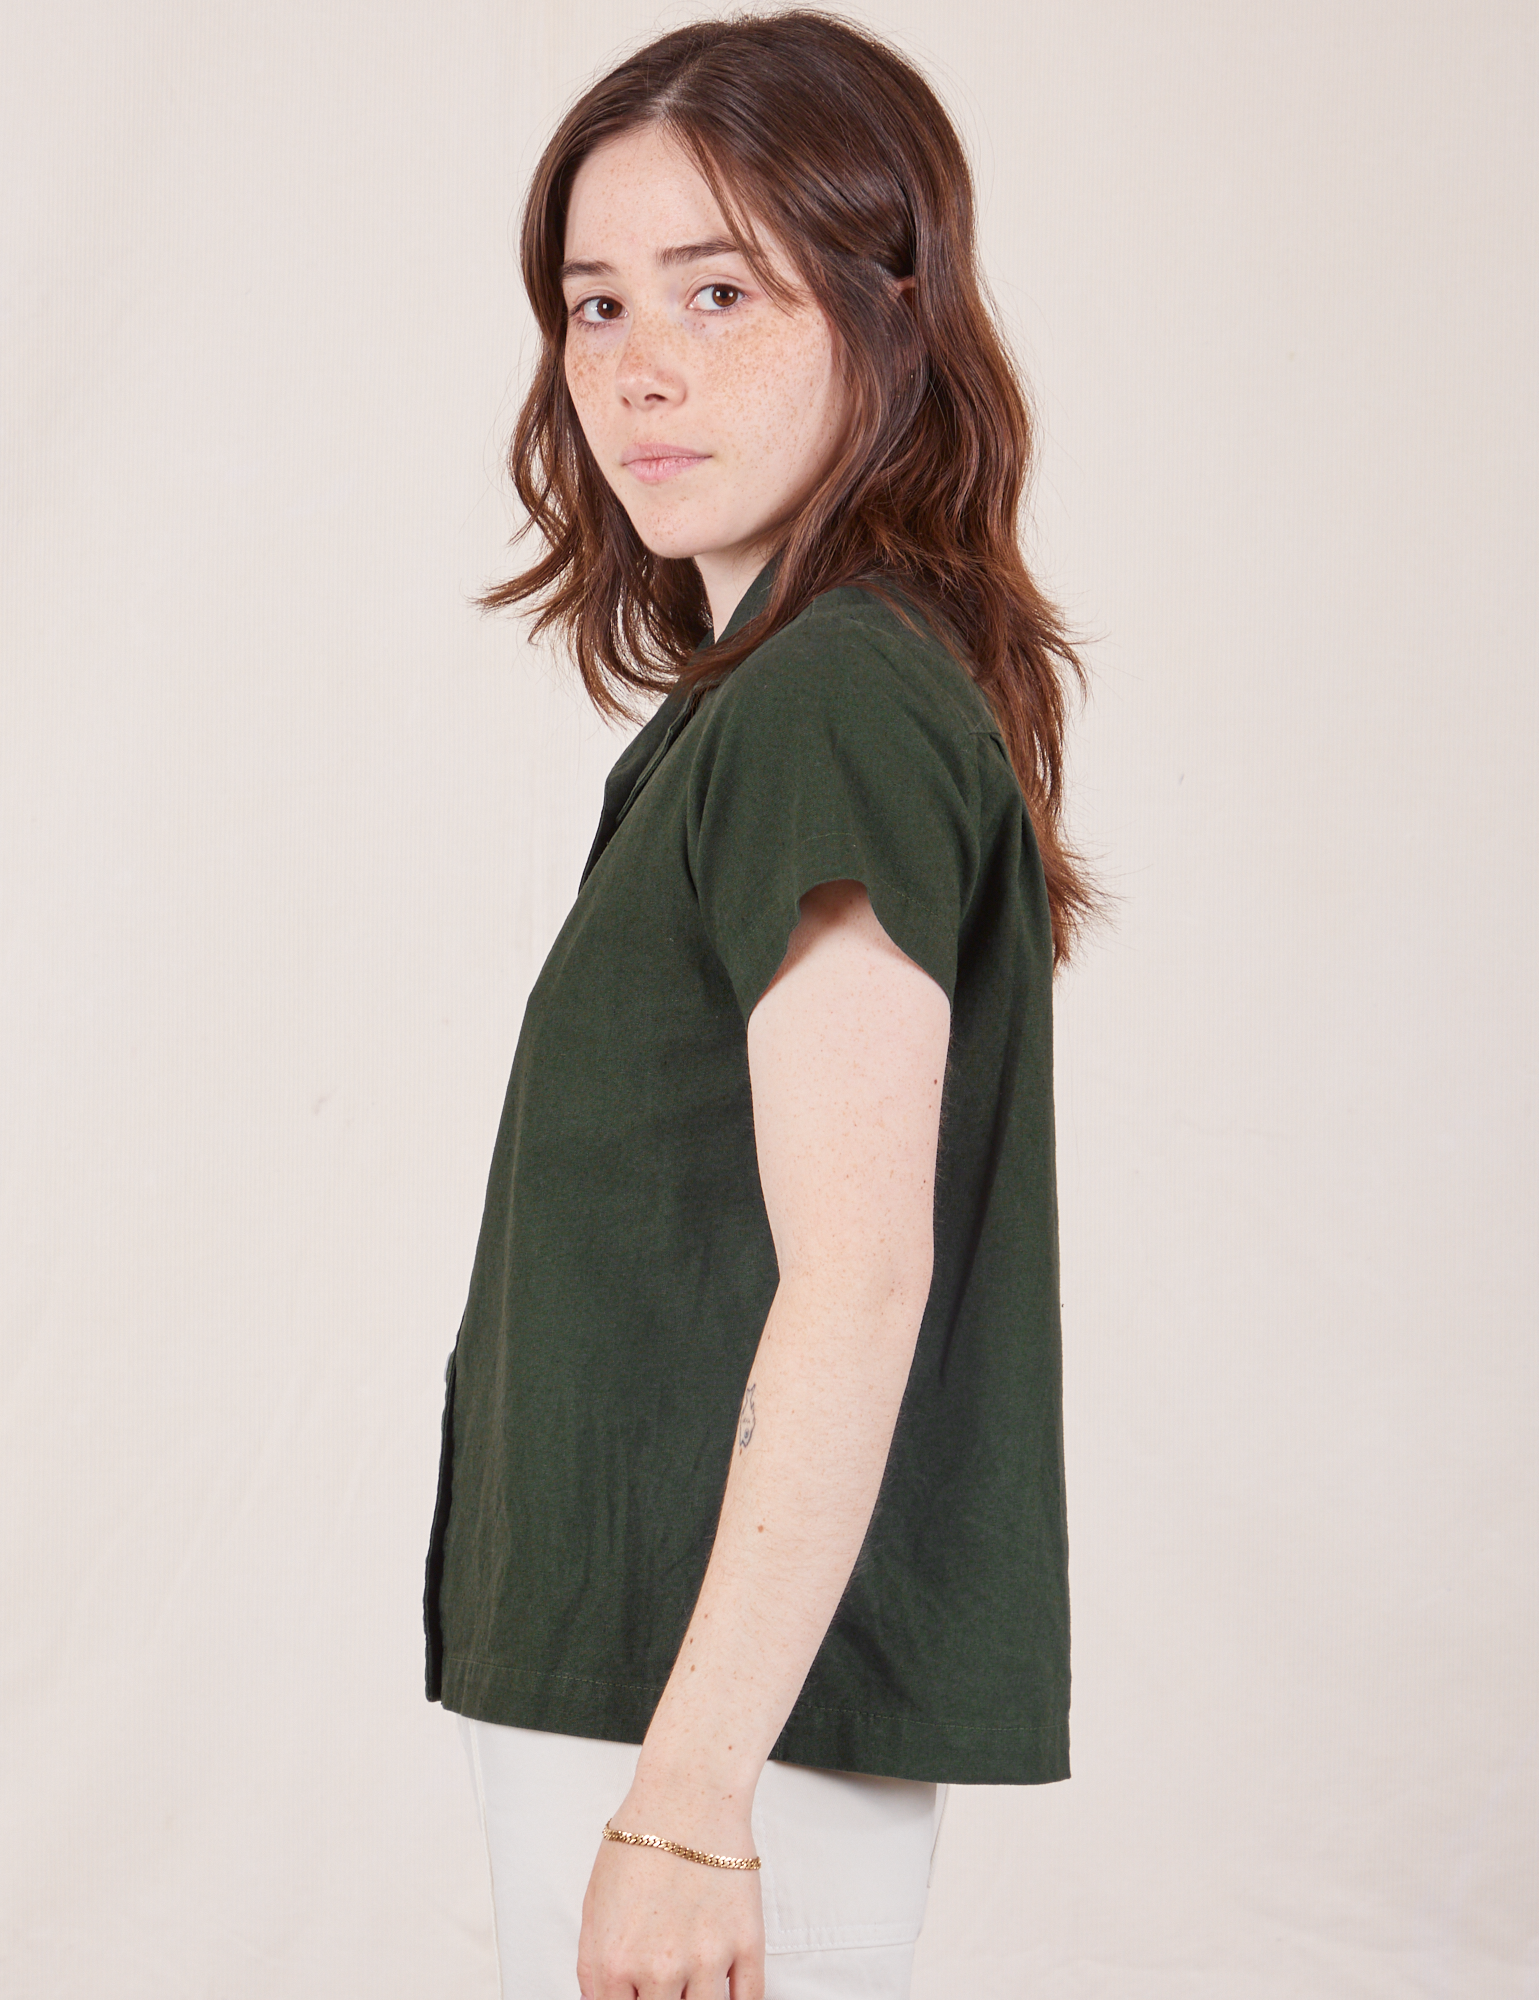 Pantry Button-Up in Swamp Green side view on Hana